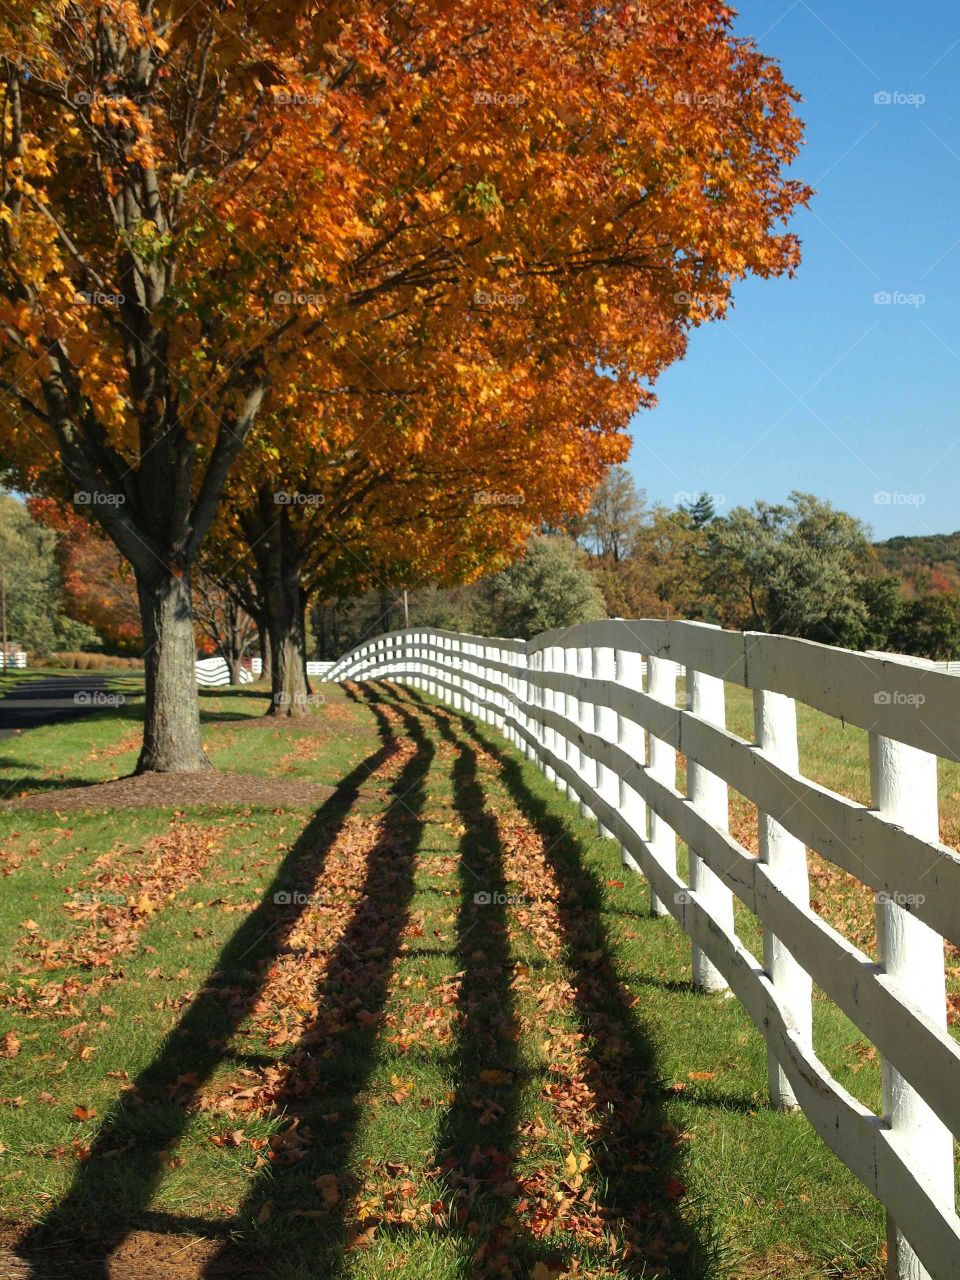 Fence on grassy field in autumn